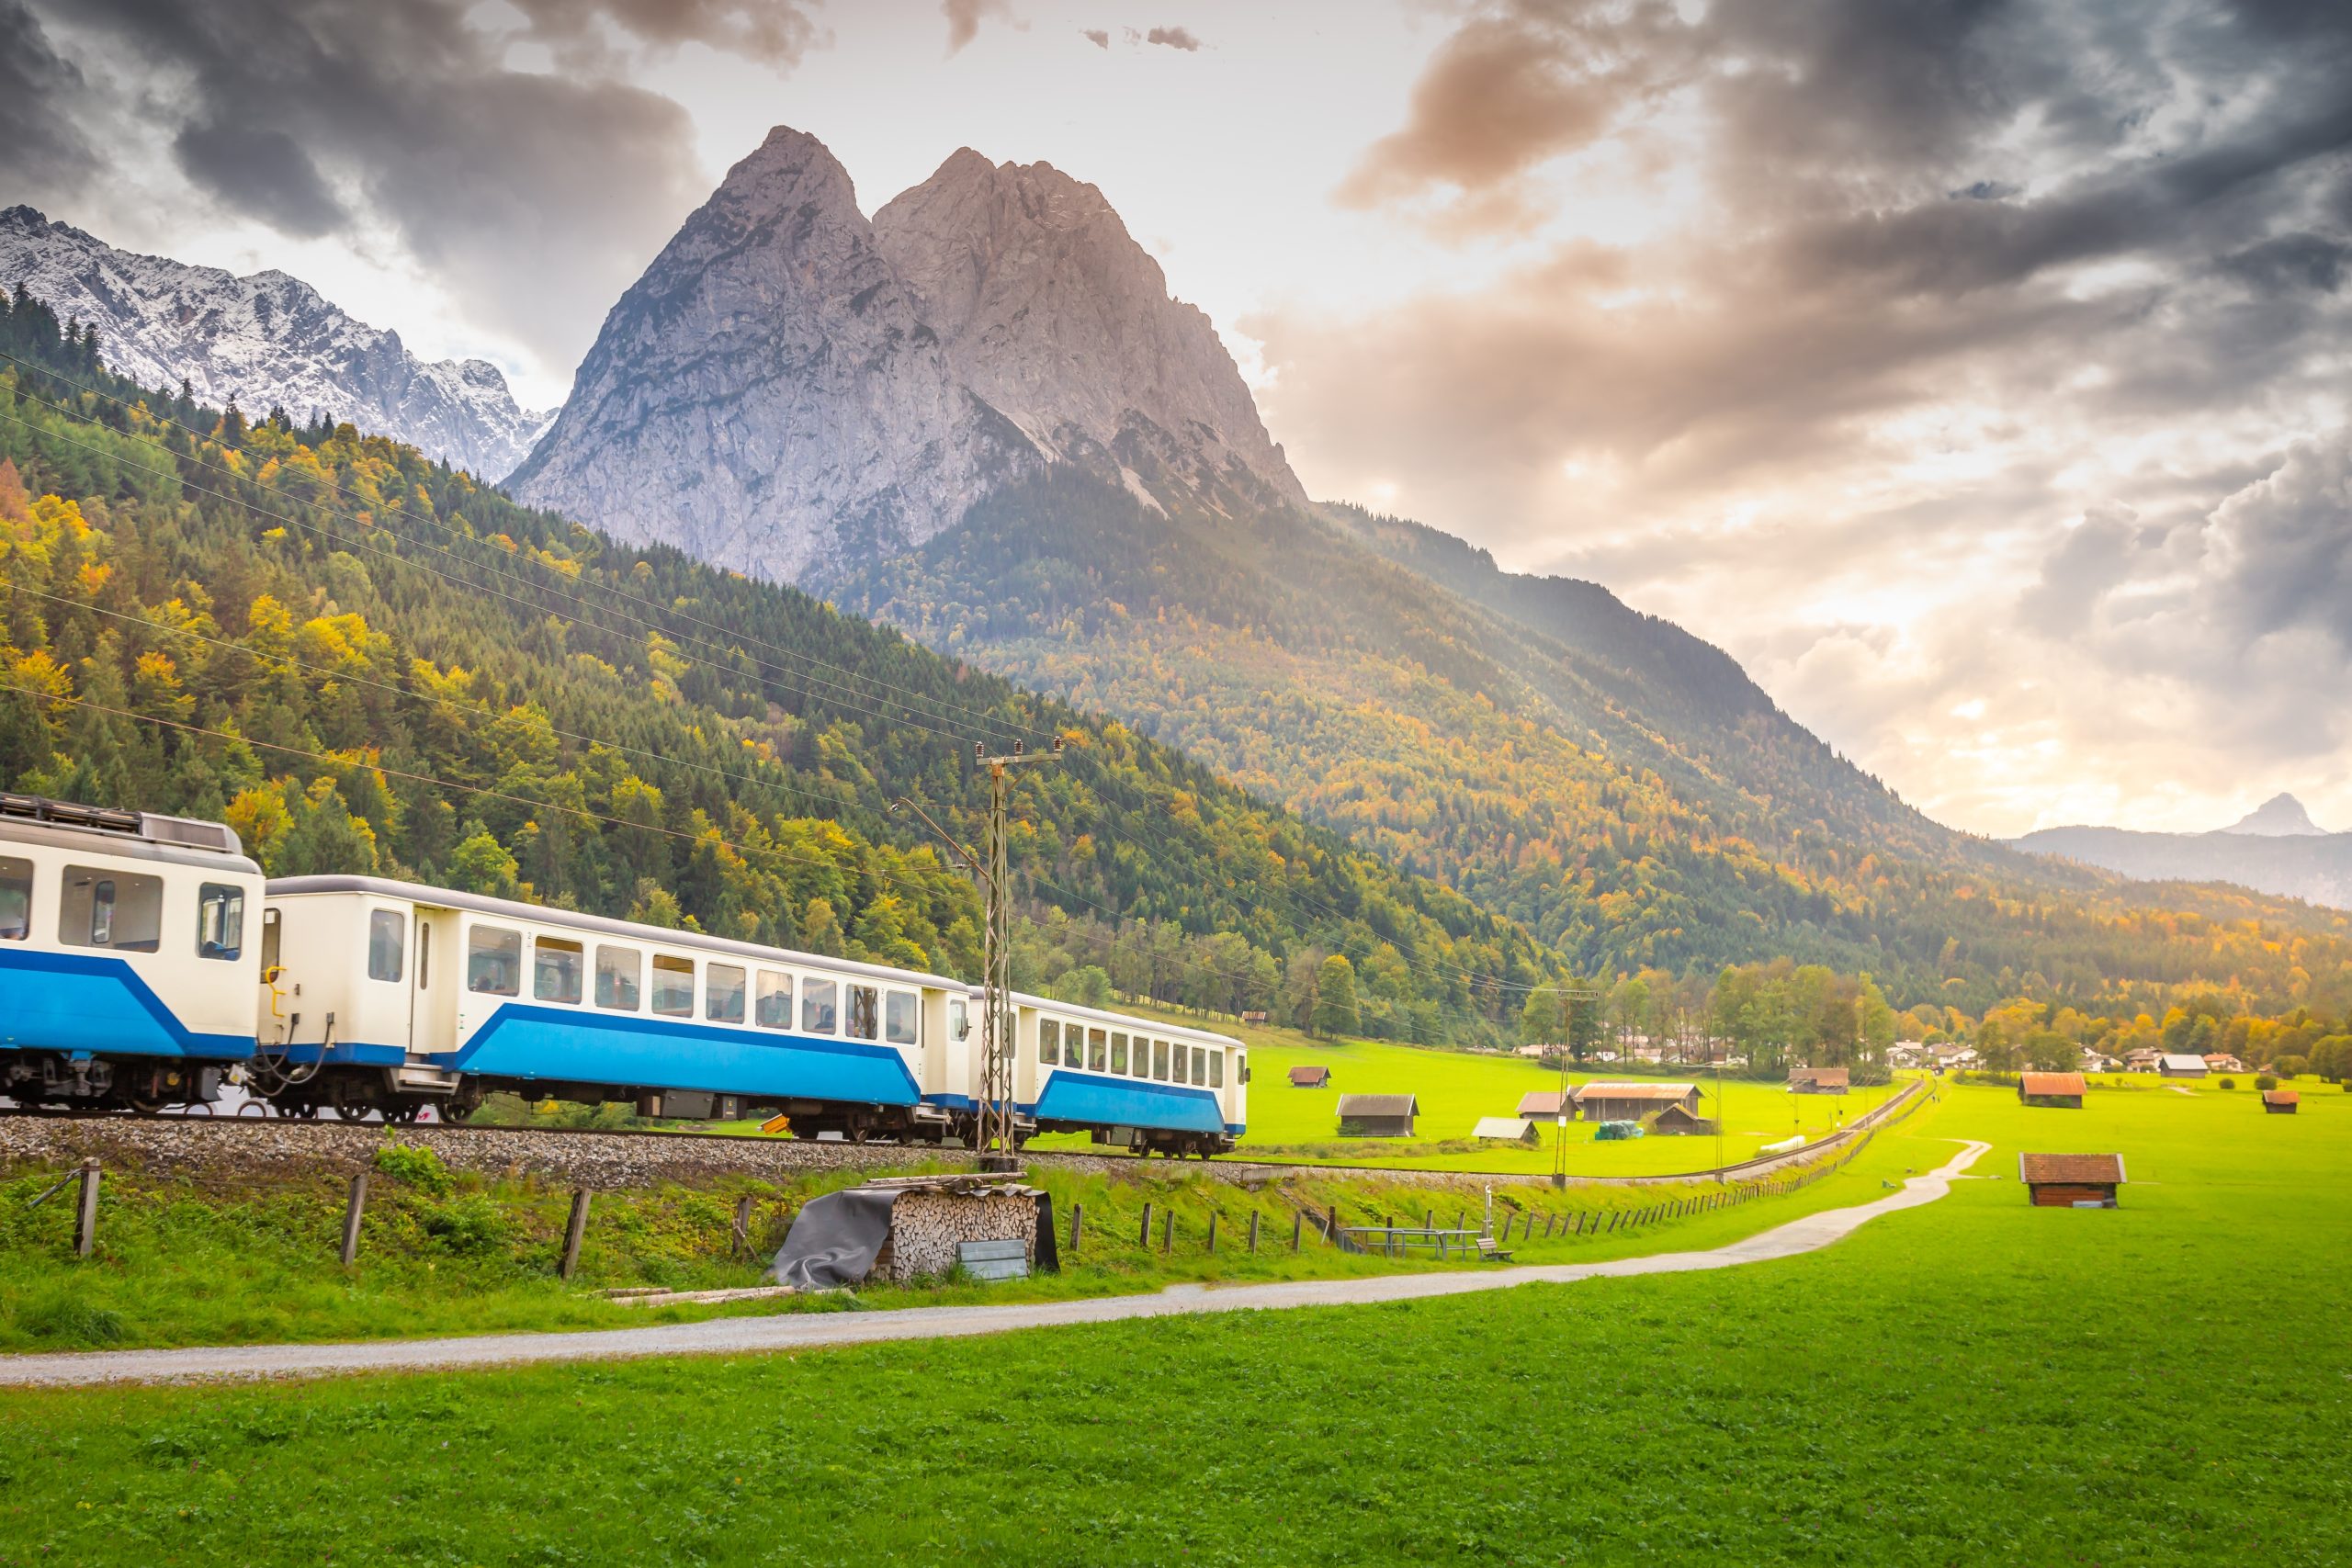 Train,In,Bavarian,Alps,At,Autumn,And,Wooden,Barns,At